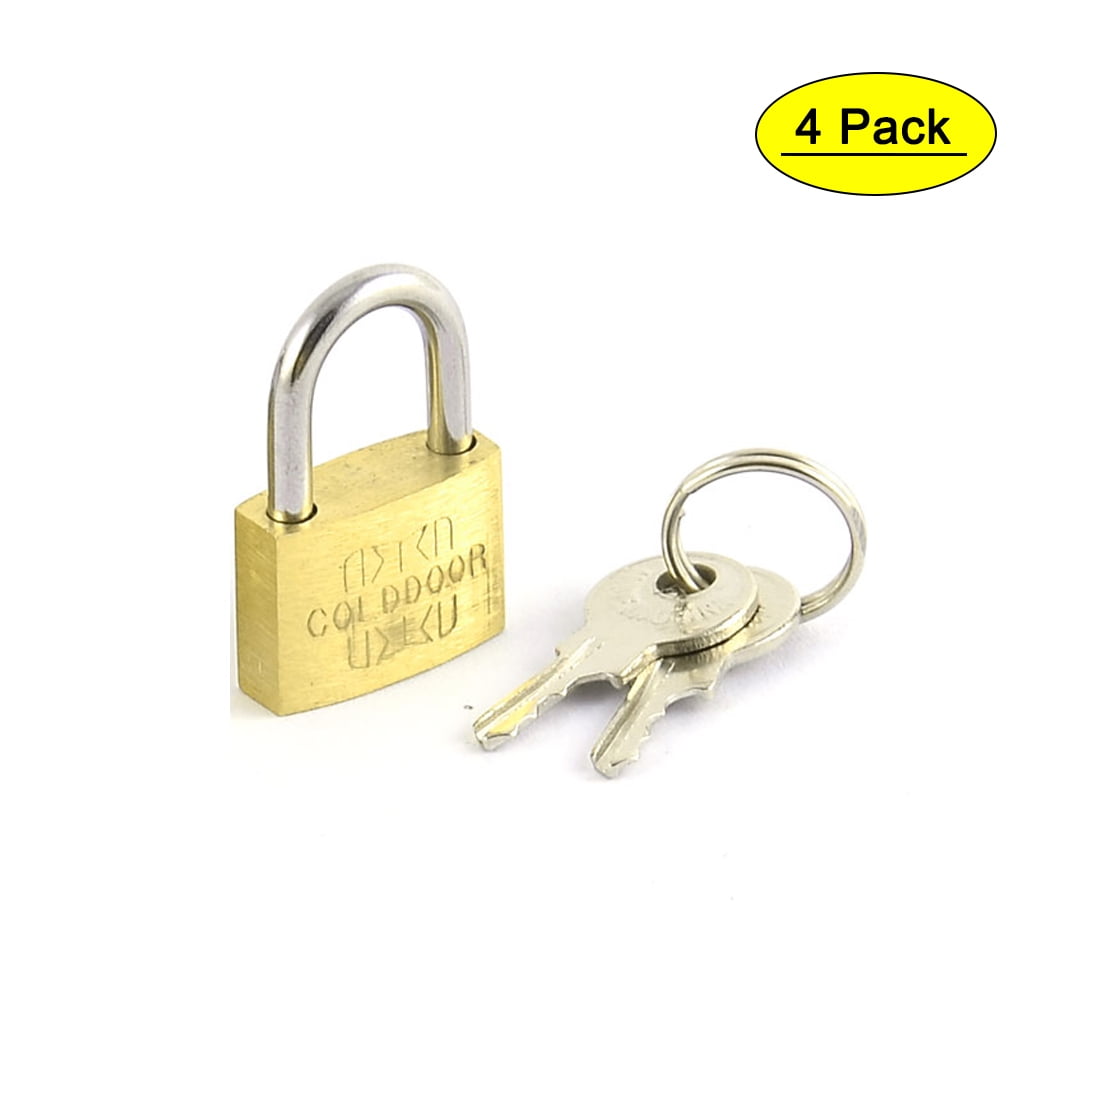 2" Inch Padlock With 2 Keys Brass Lock Luggage Toolbox Cabinets 